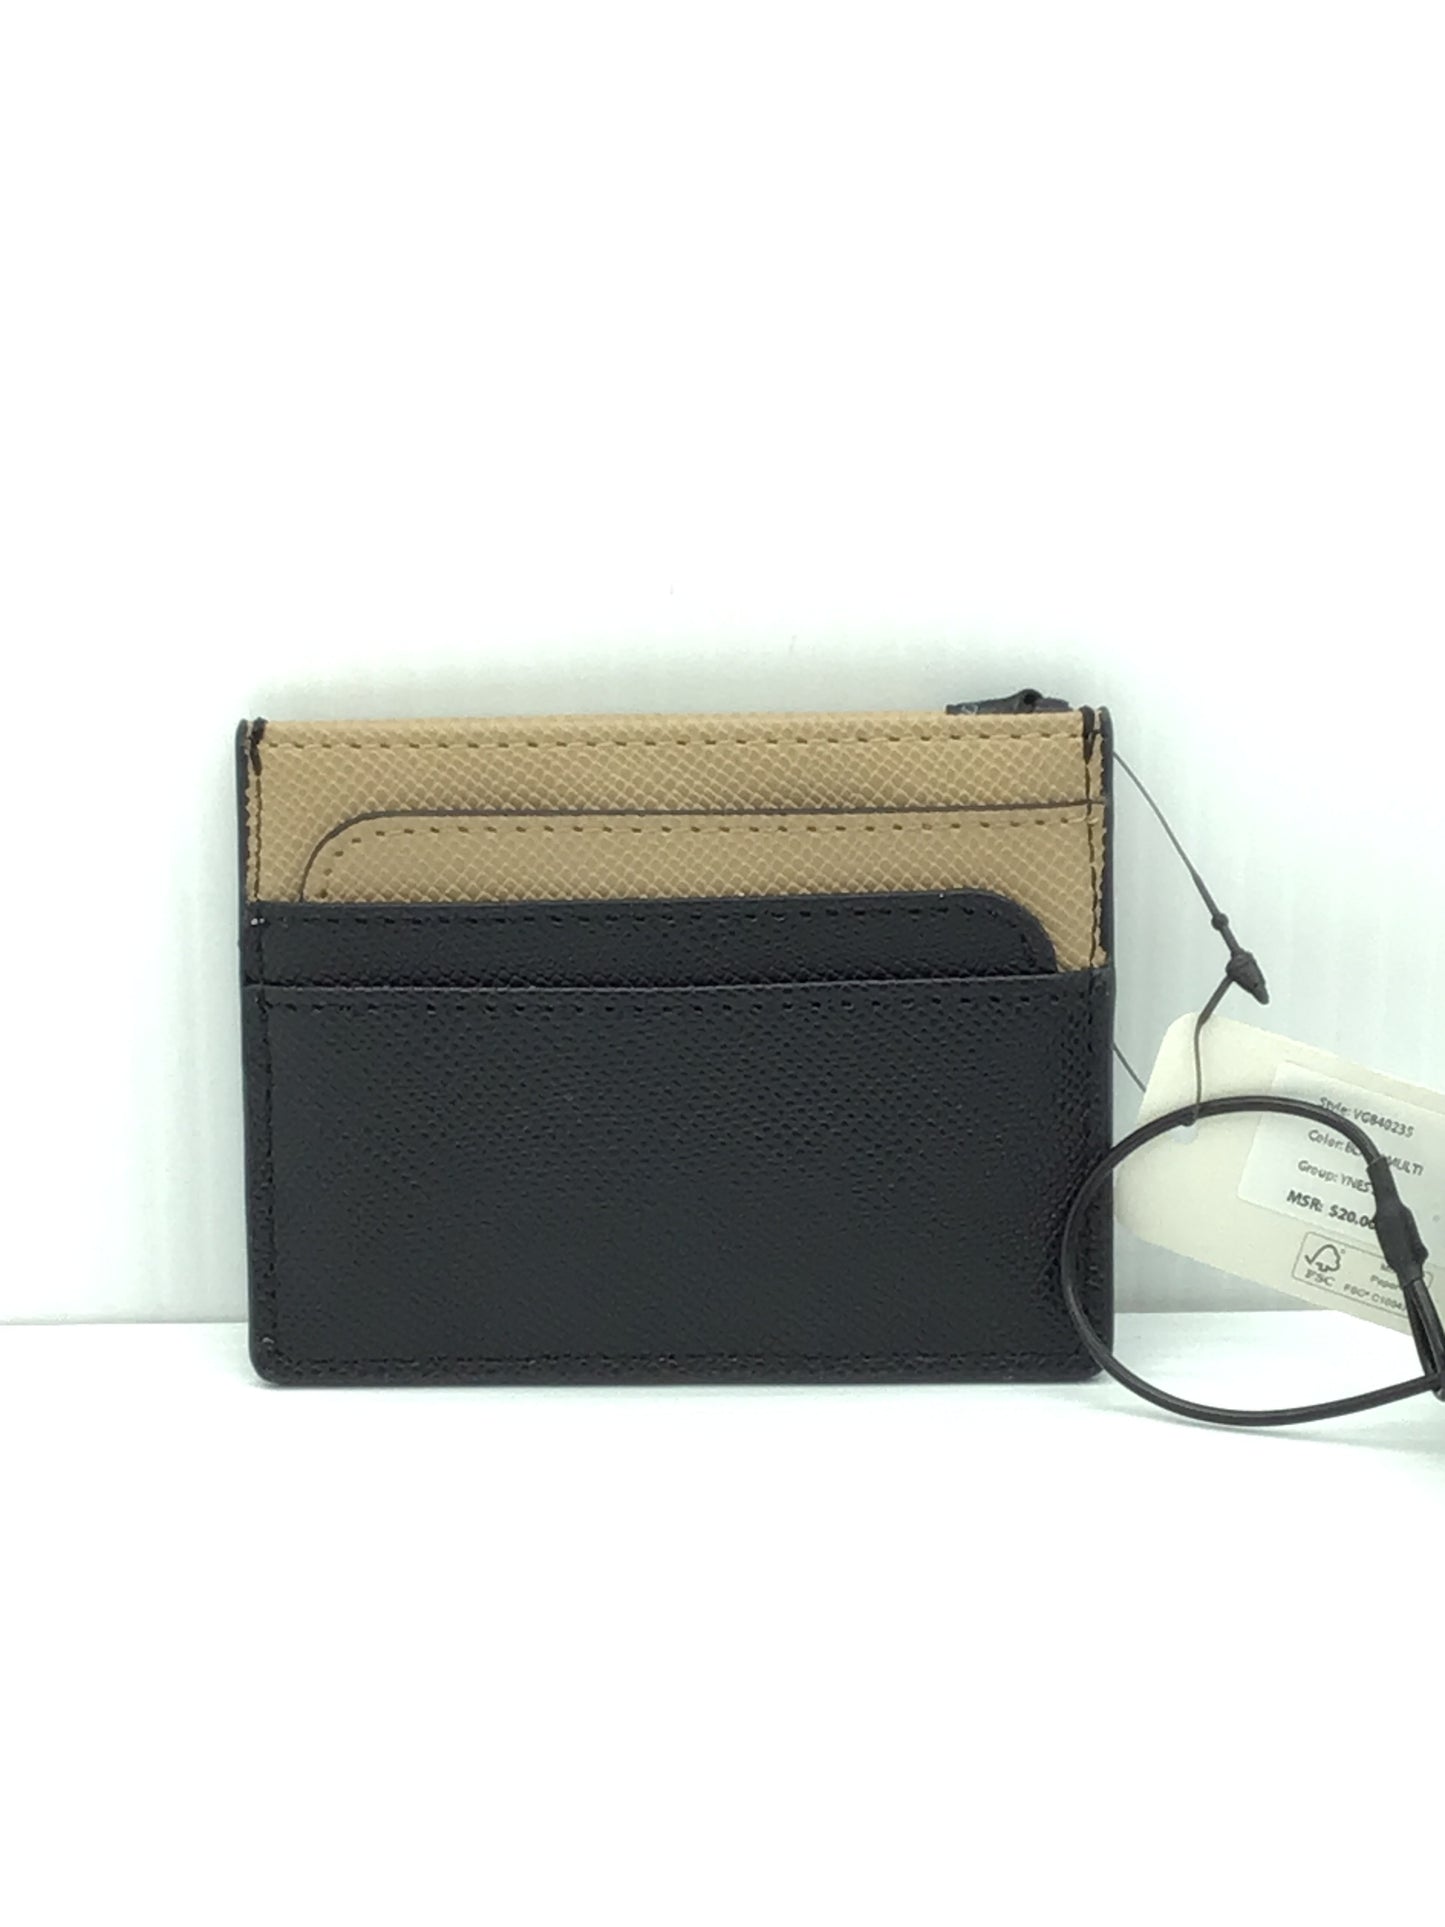 Id/card Holder By Guess